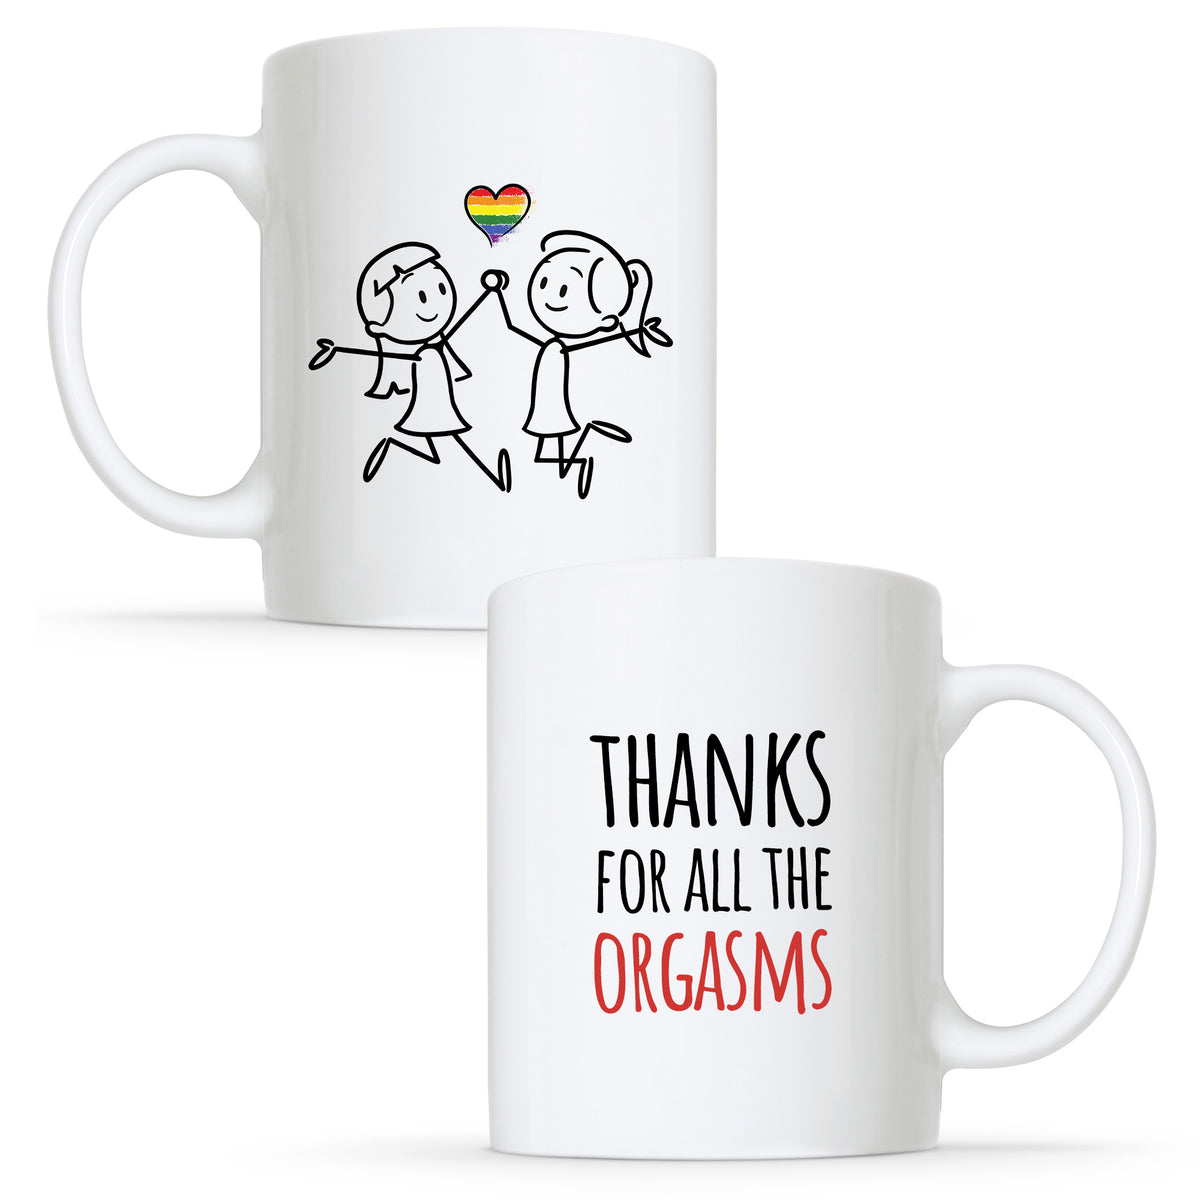 Thanks for all the Orgasms - Lesbian Gay Couple Mug Set | Gift